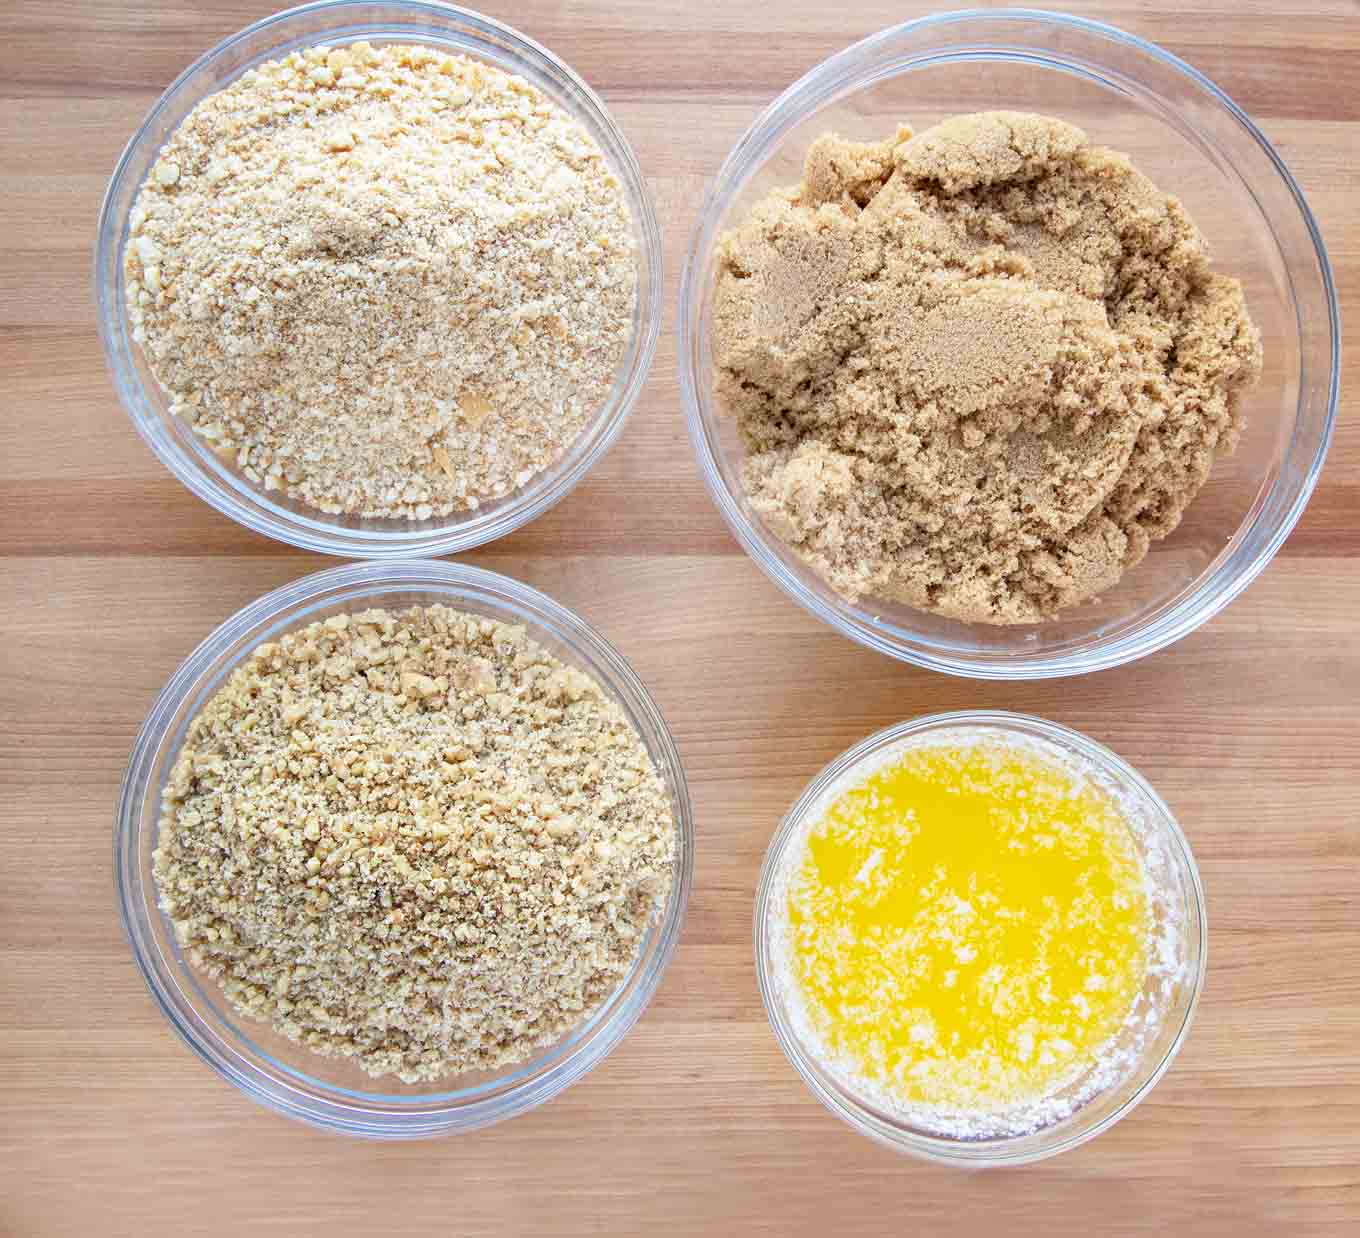 ingredients for crunch topping in glass bowls